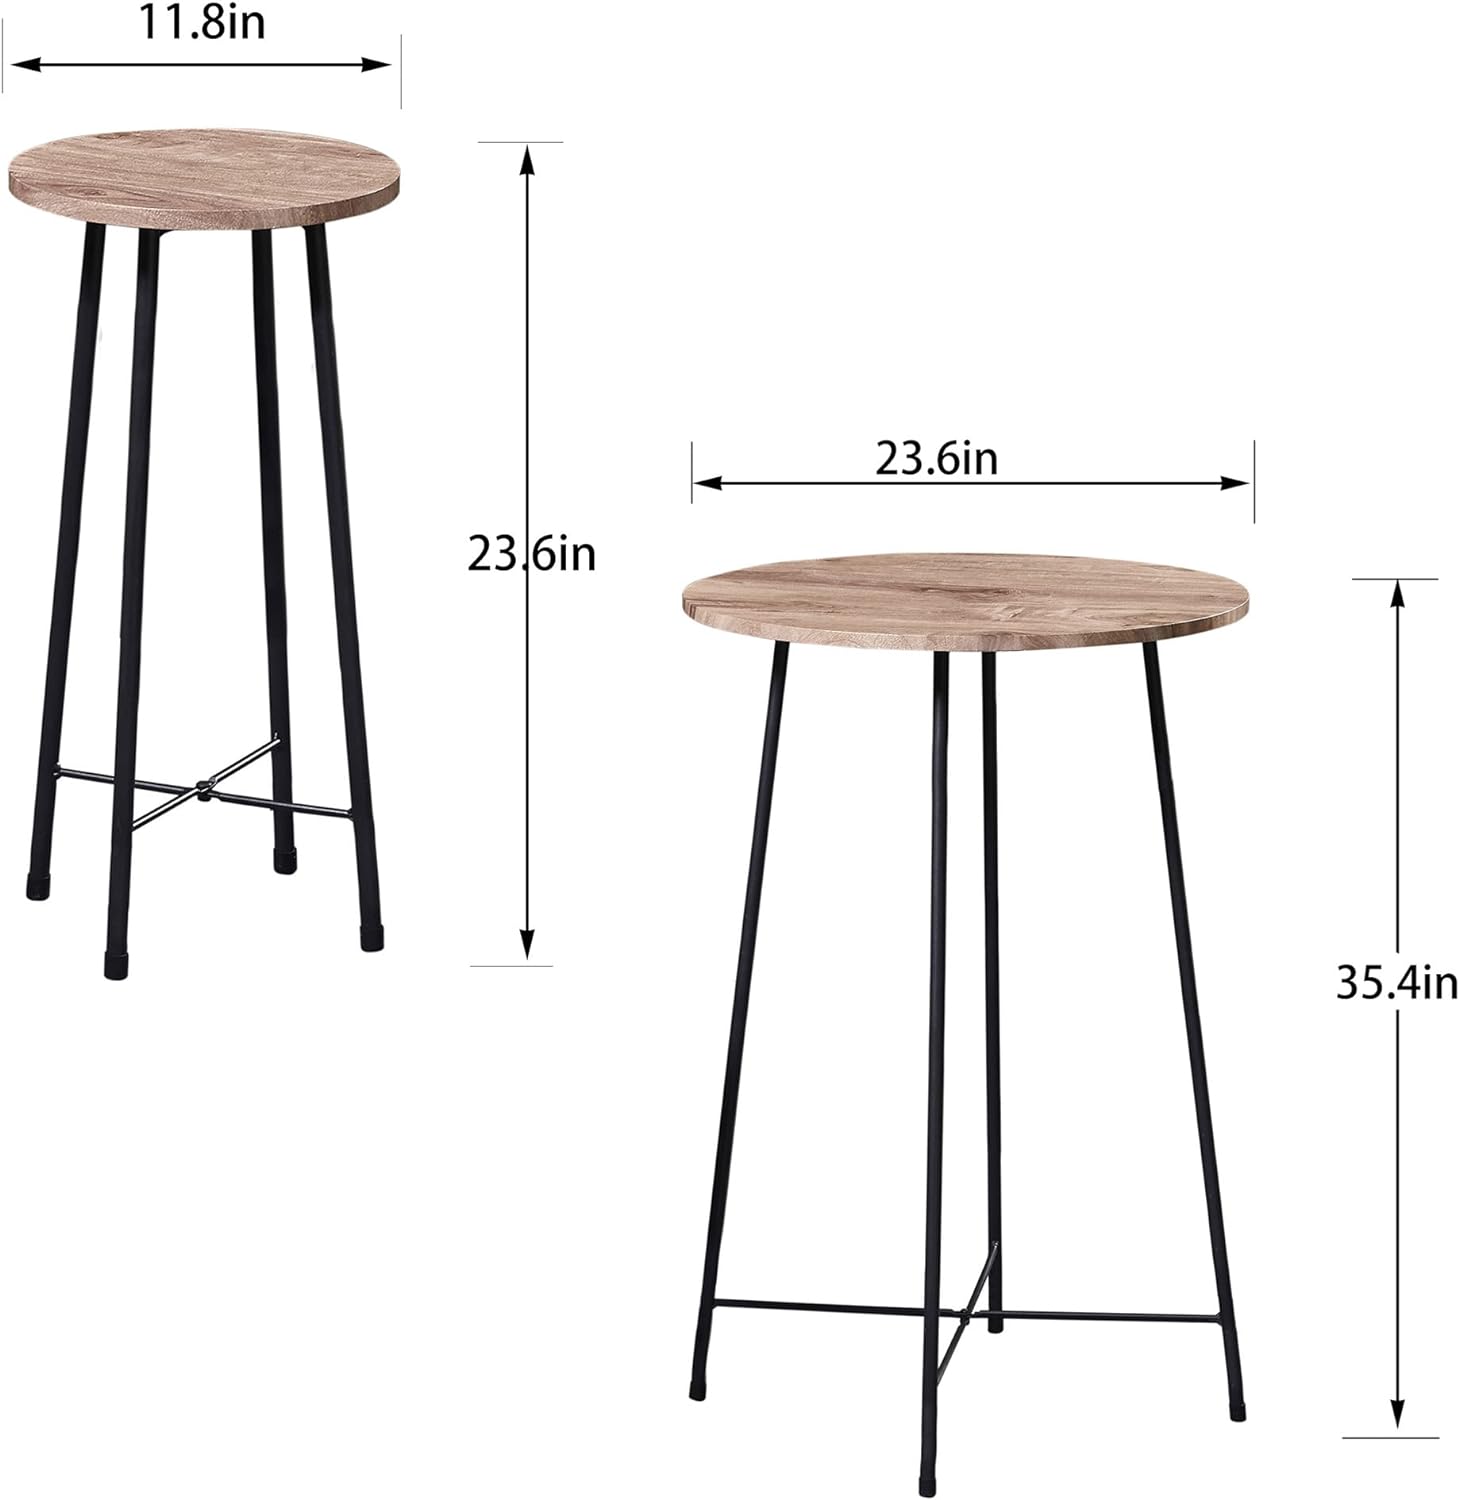 VECELO 3-Piece Round Pub Table Set with Counter Height & Wood top